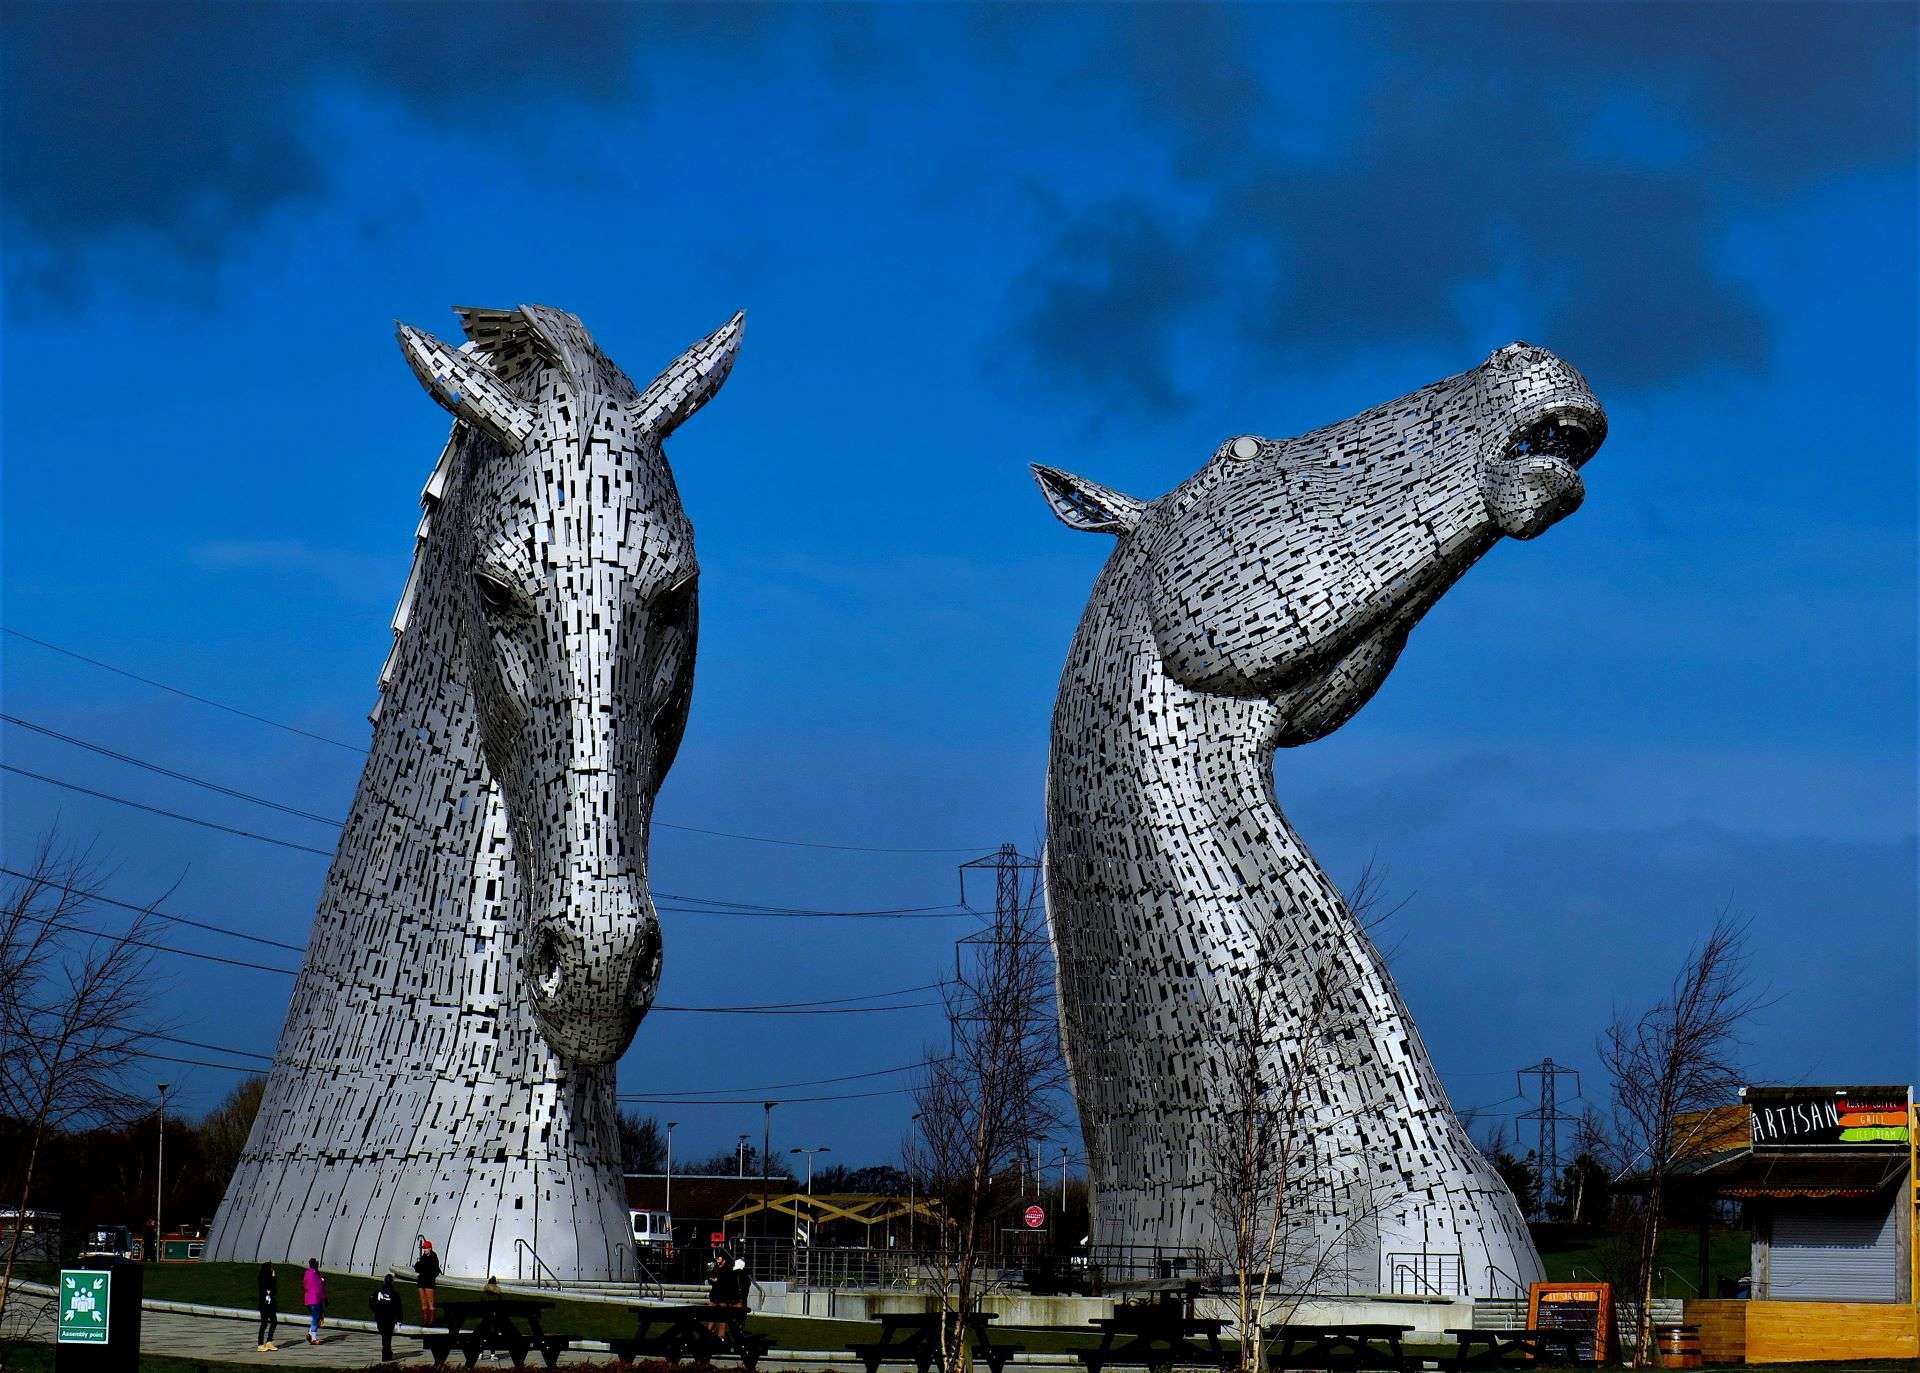 The Kelpies sculpture by Andy Scott in Helix Park.